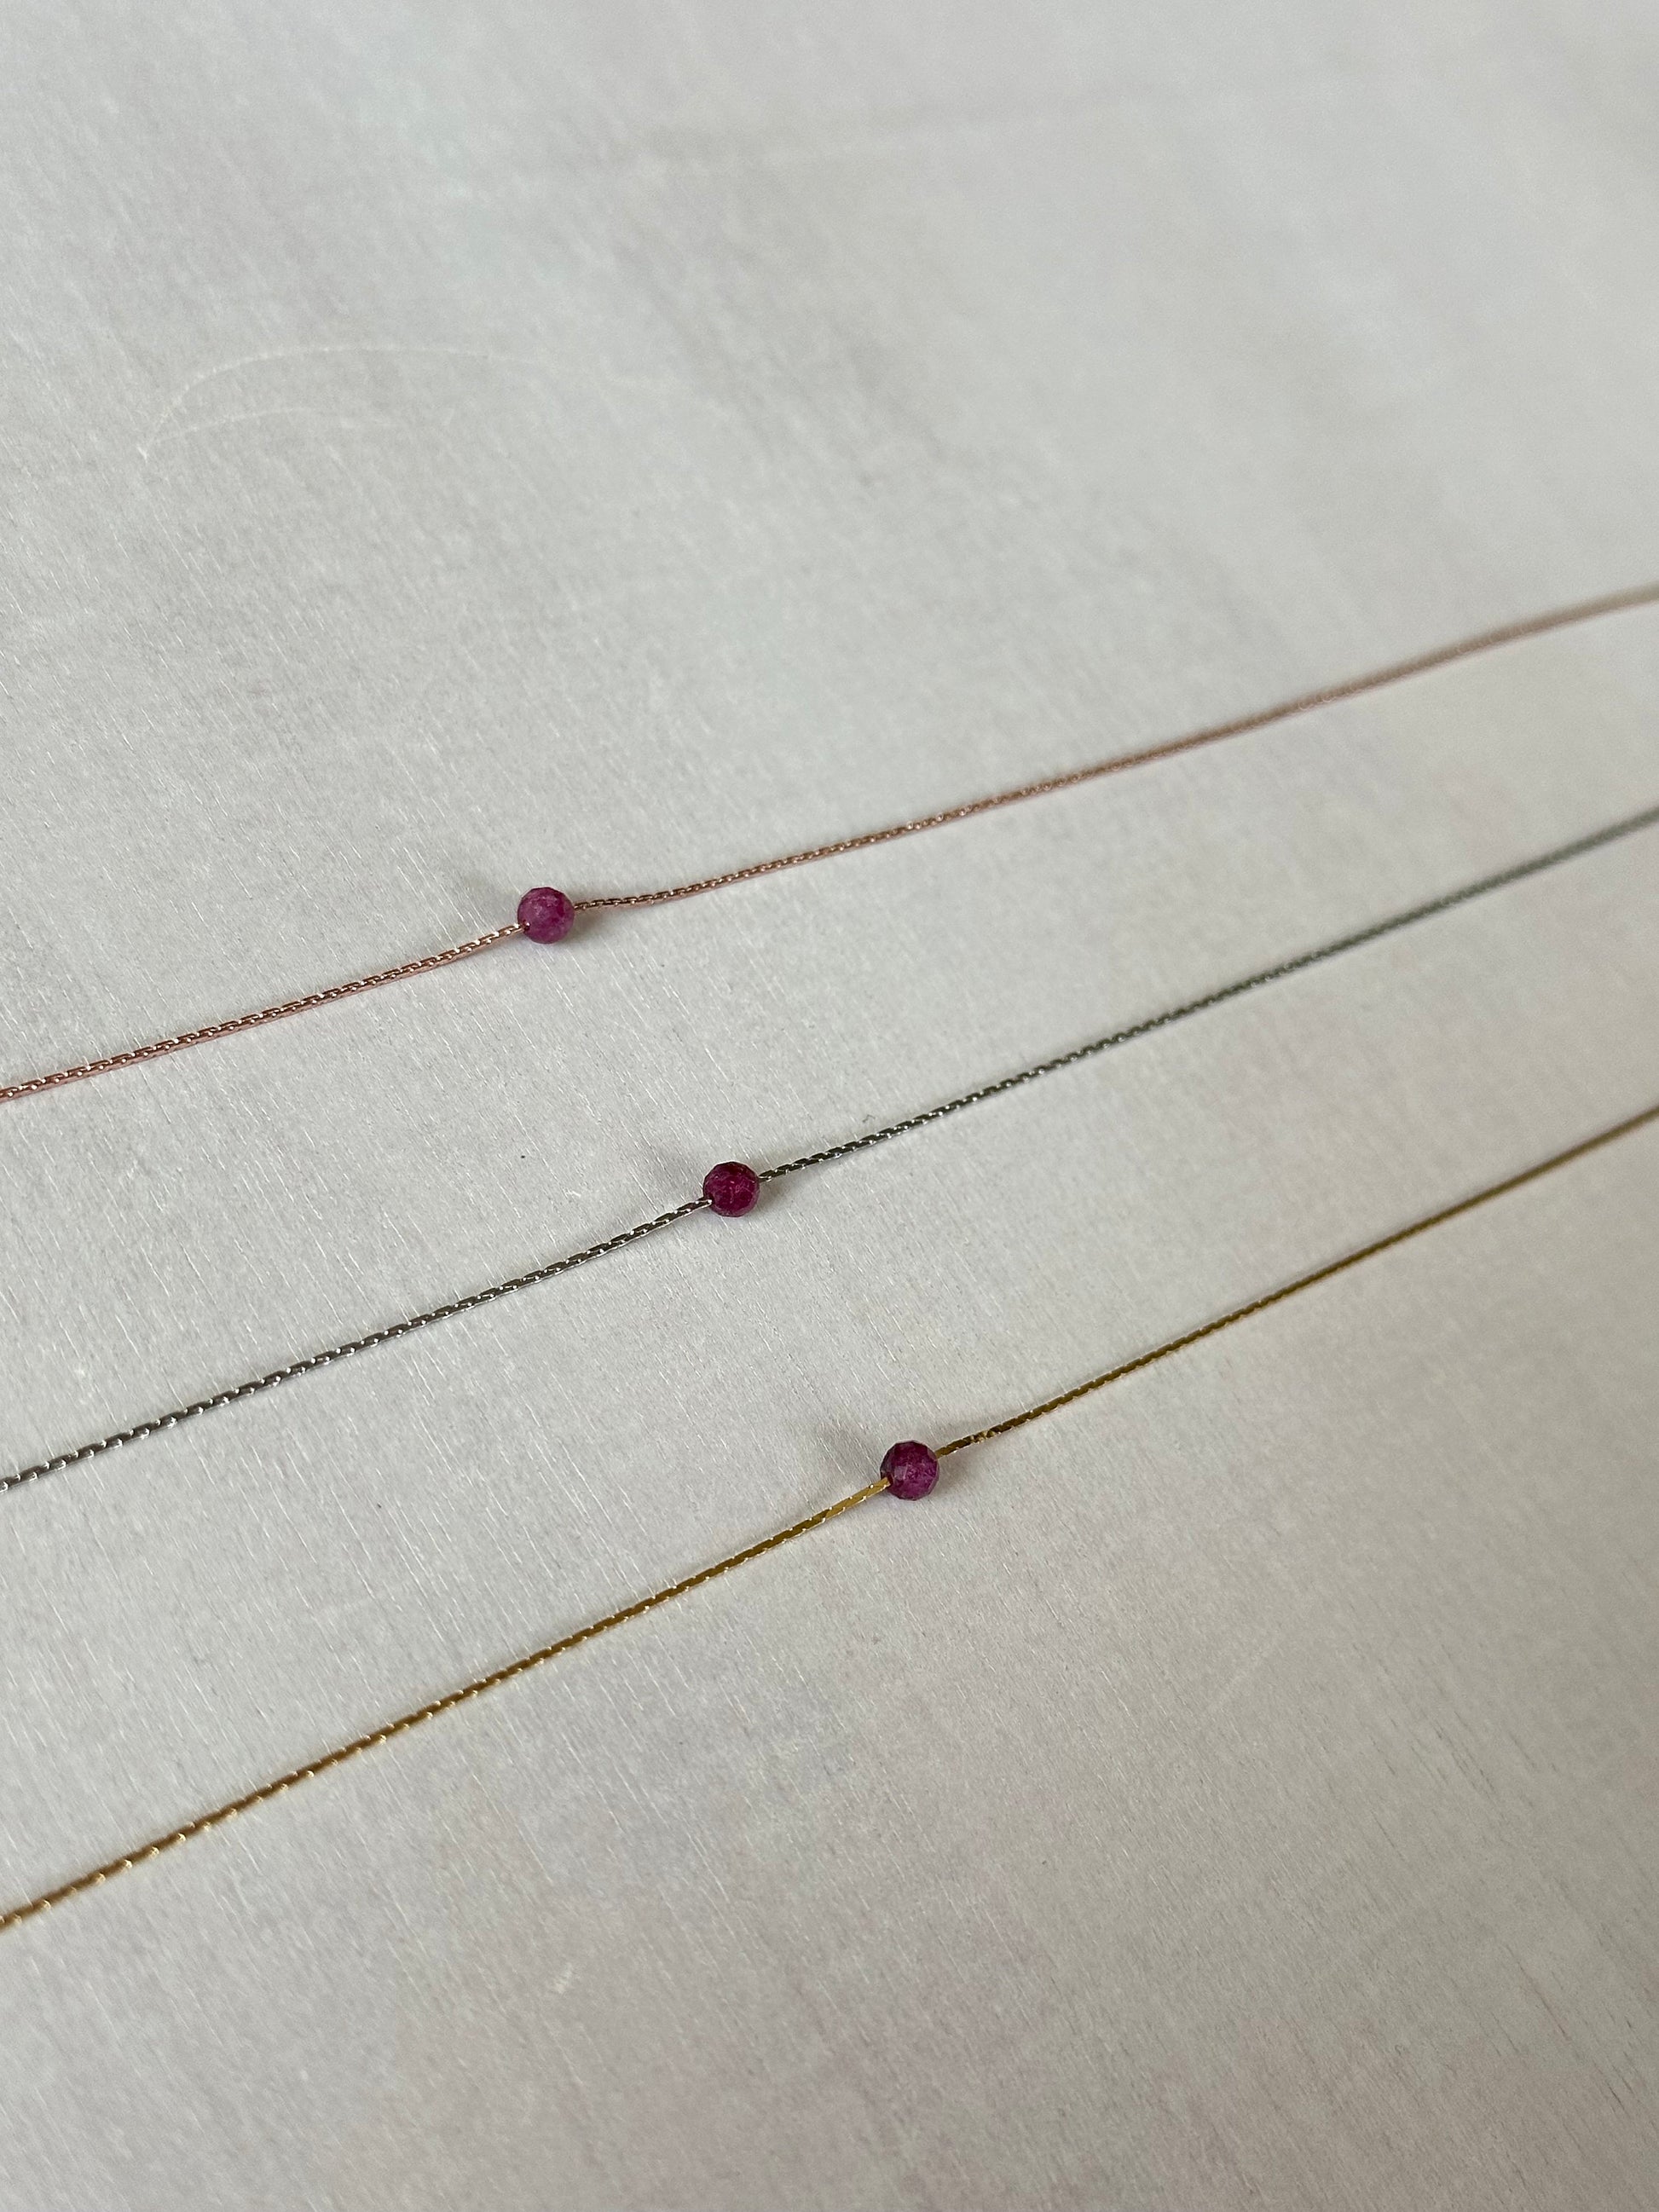 Ruby Necklace | Rose Gold | Gold | Silver | Dainty Necklace | Layering Necklace | Gemstone Necklace | Bead Necklace